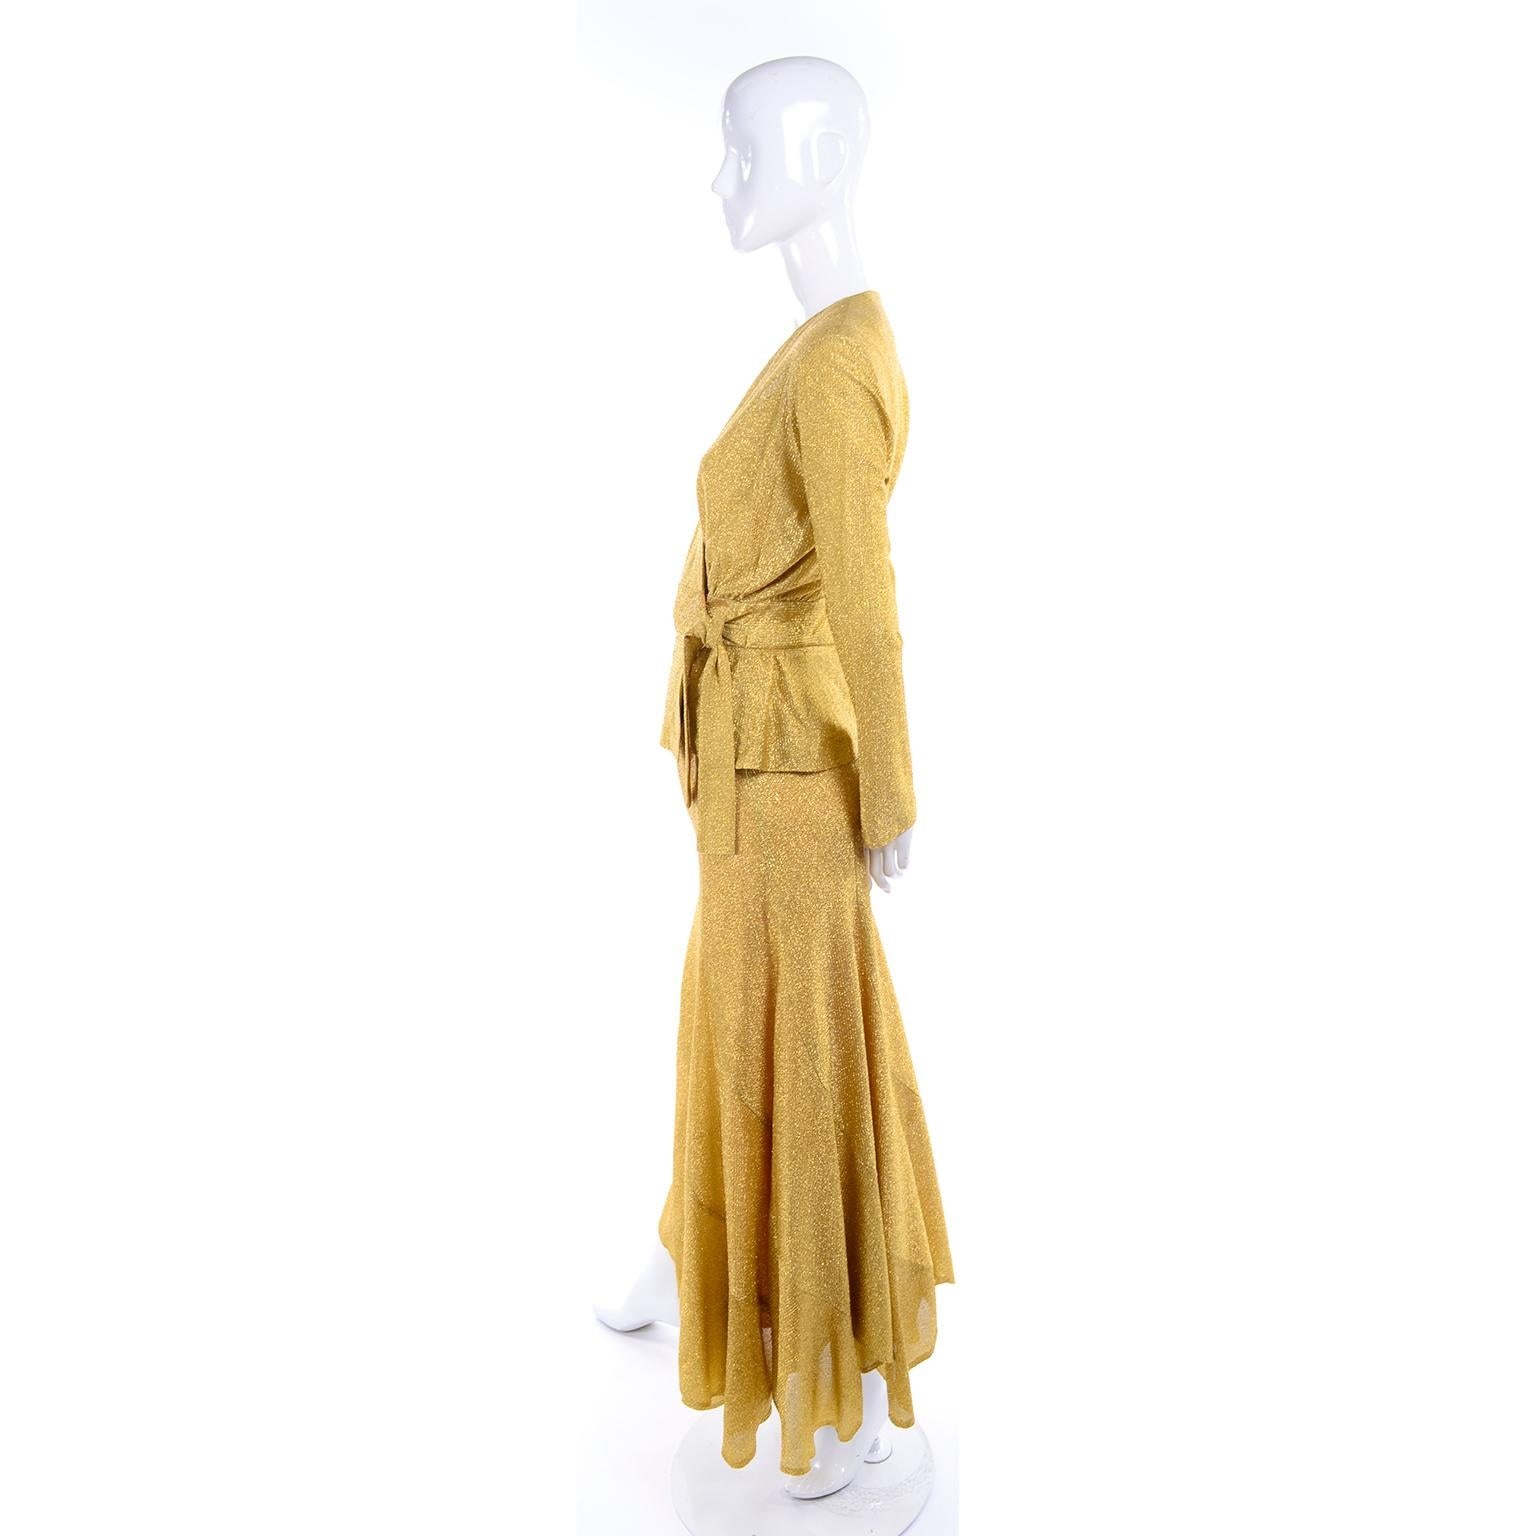 Beverly Paige Gold Lurex Evening Dress 2 pc With Long Bias Cut Skirt, 1970s 1